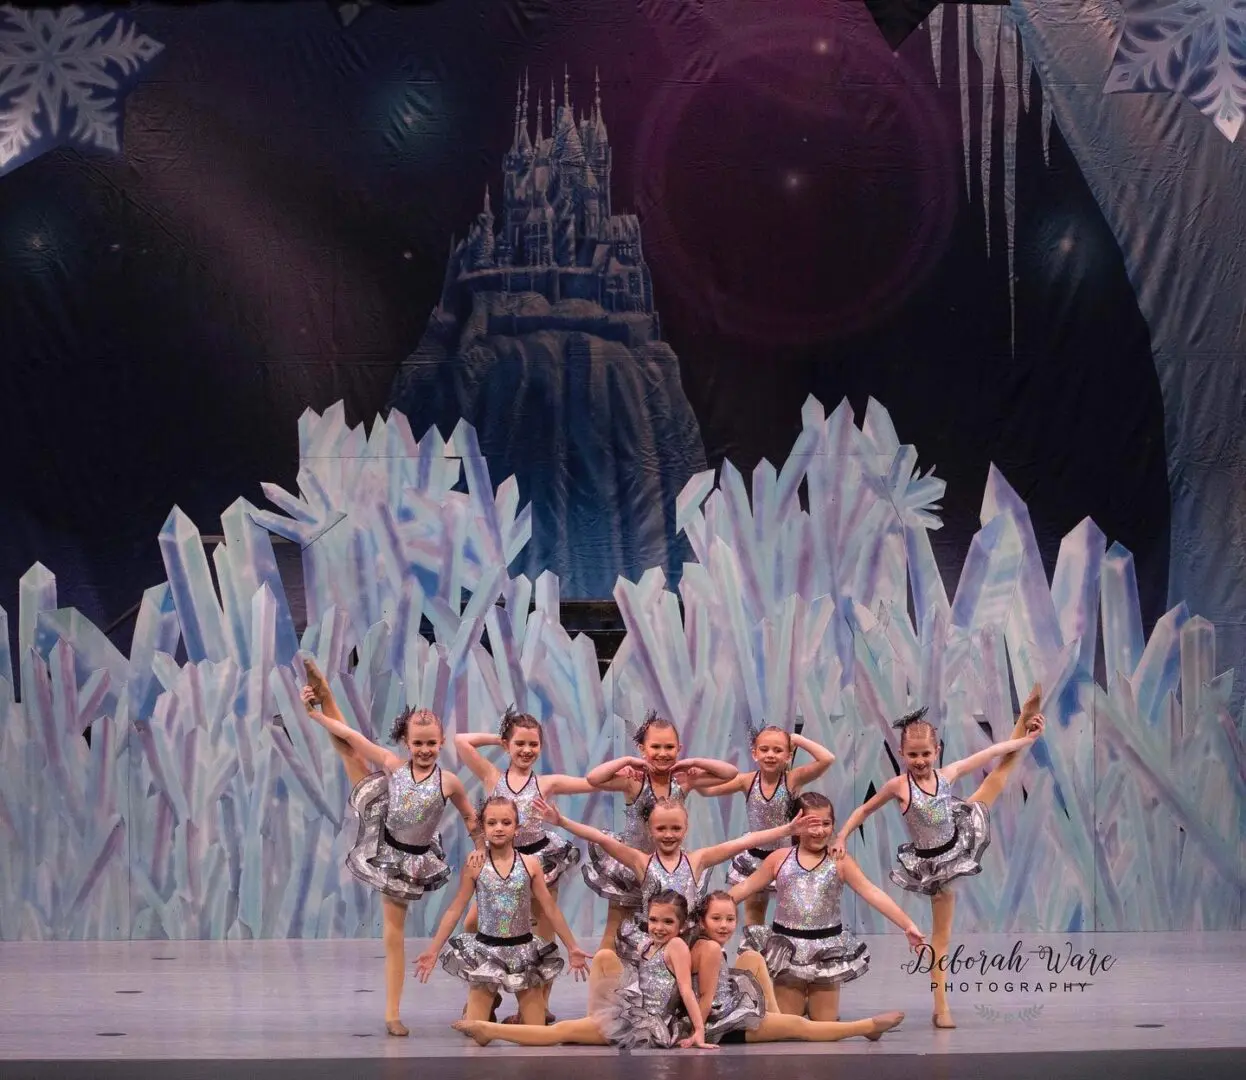 A Group of Girls in Shiny Ballerina Costumes on a Stage